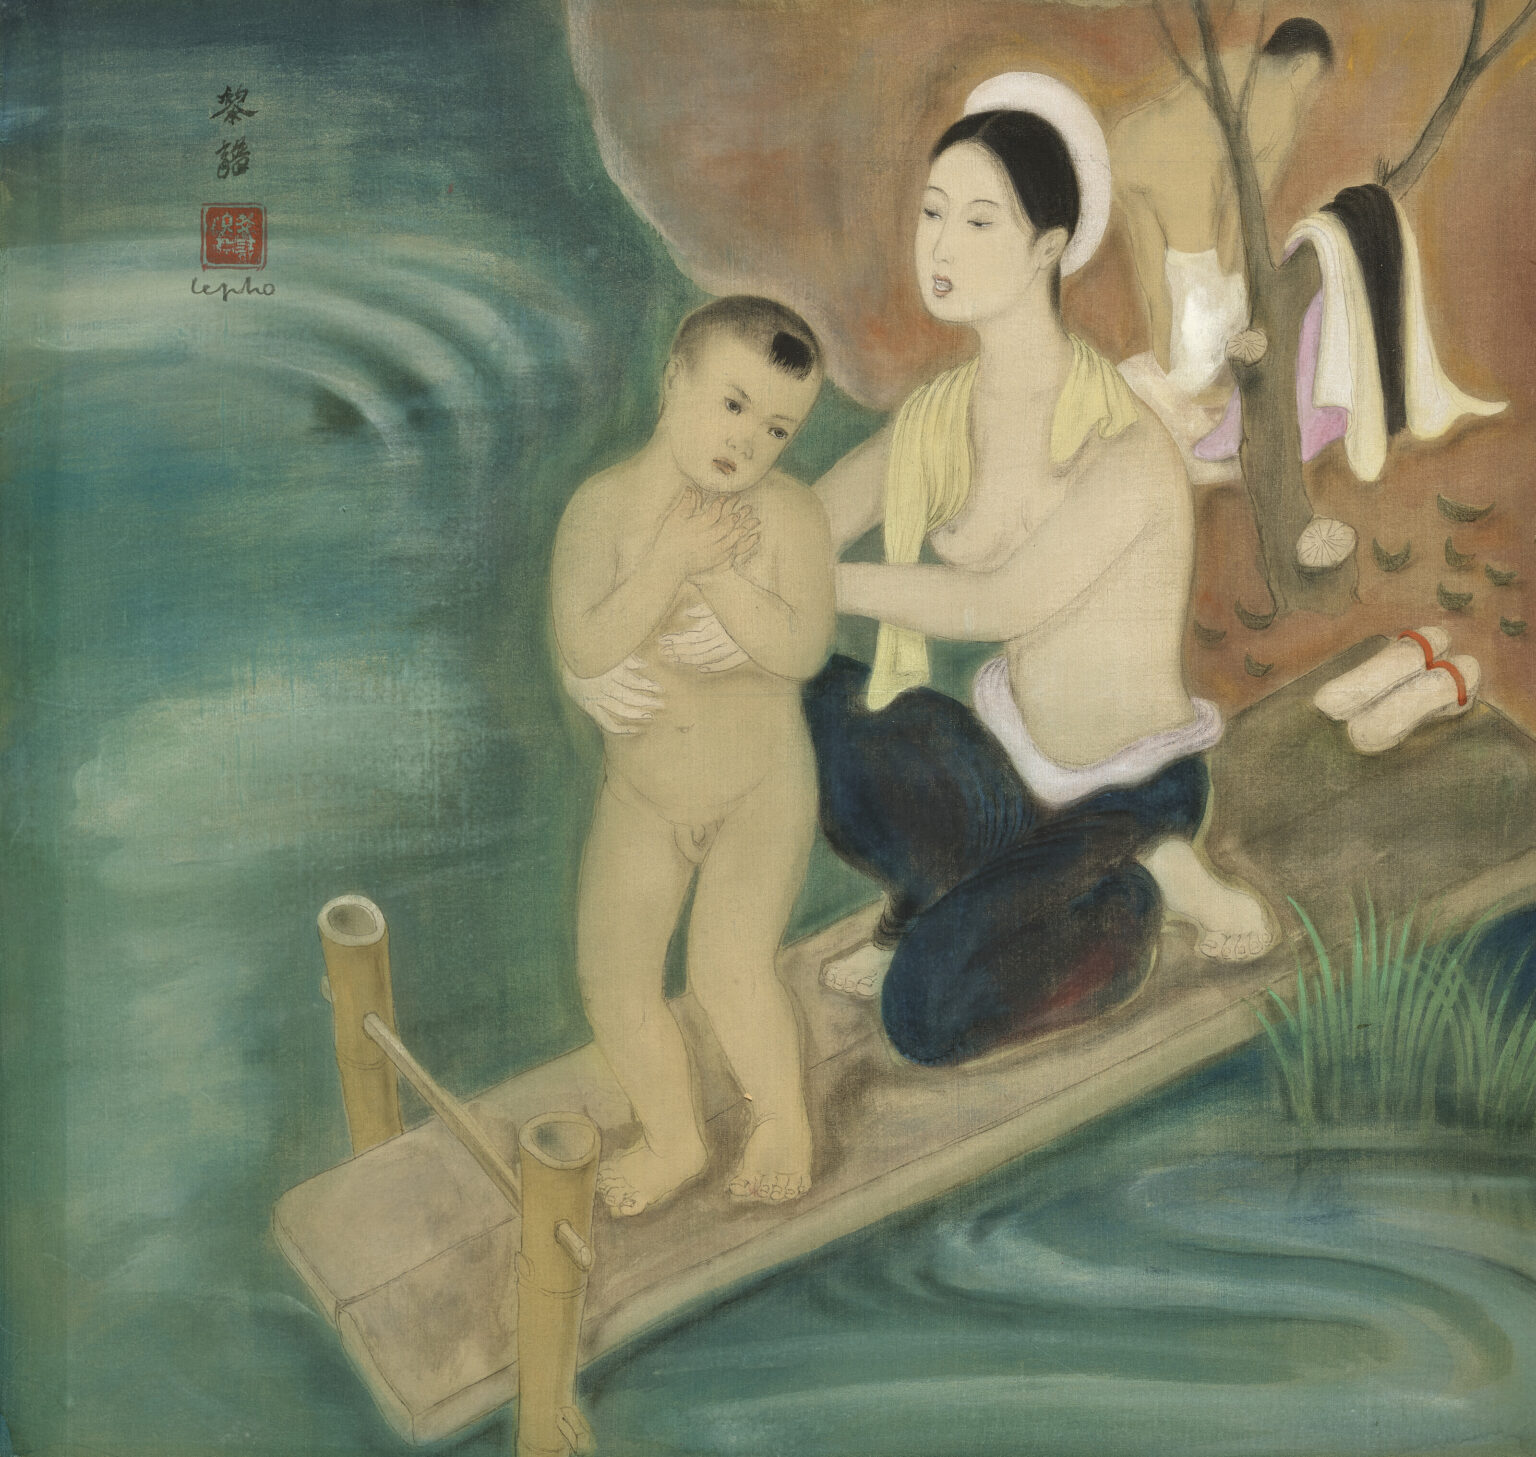 LE PHO (1907-2001)
Le Bain (The Bath) 
signed in Chinese and signed again ‘le pho’ (upper left)
ink and gouache on silk 
40 x 39 cm. (15 3⁄4 x 15 3⁄8 in.) 
Painted circa 1938
one seal of the artist